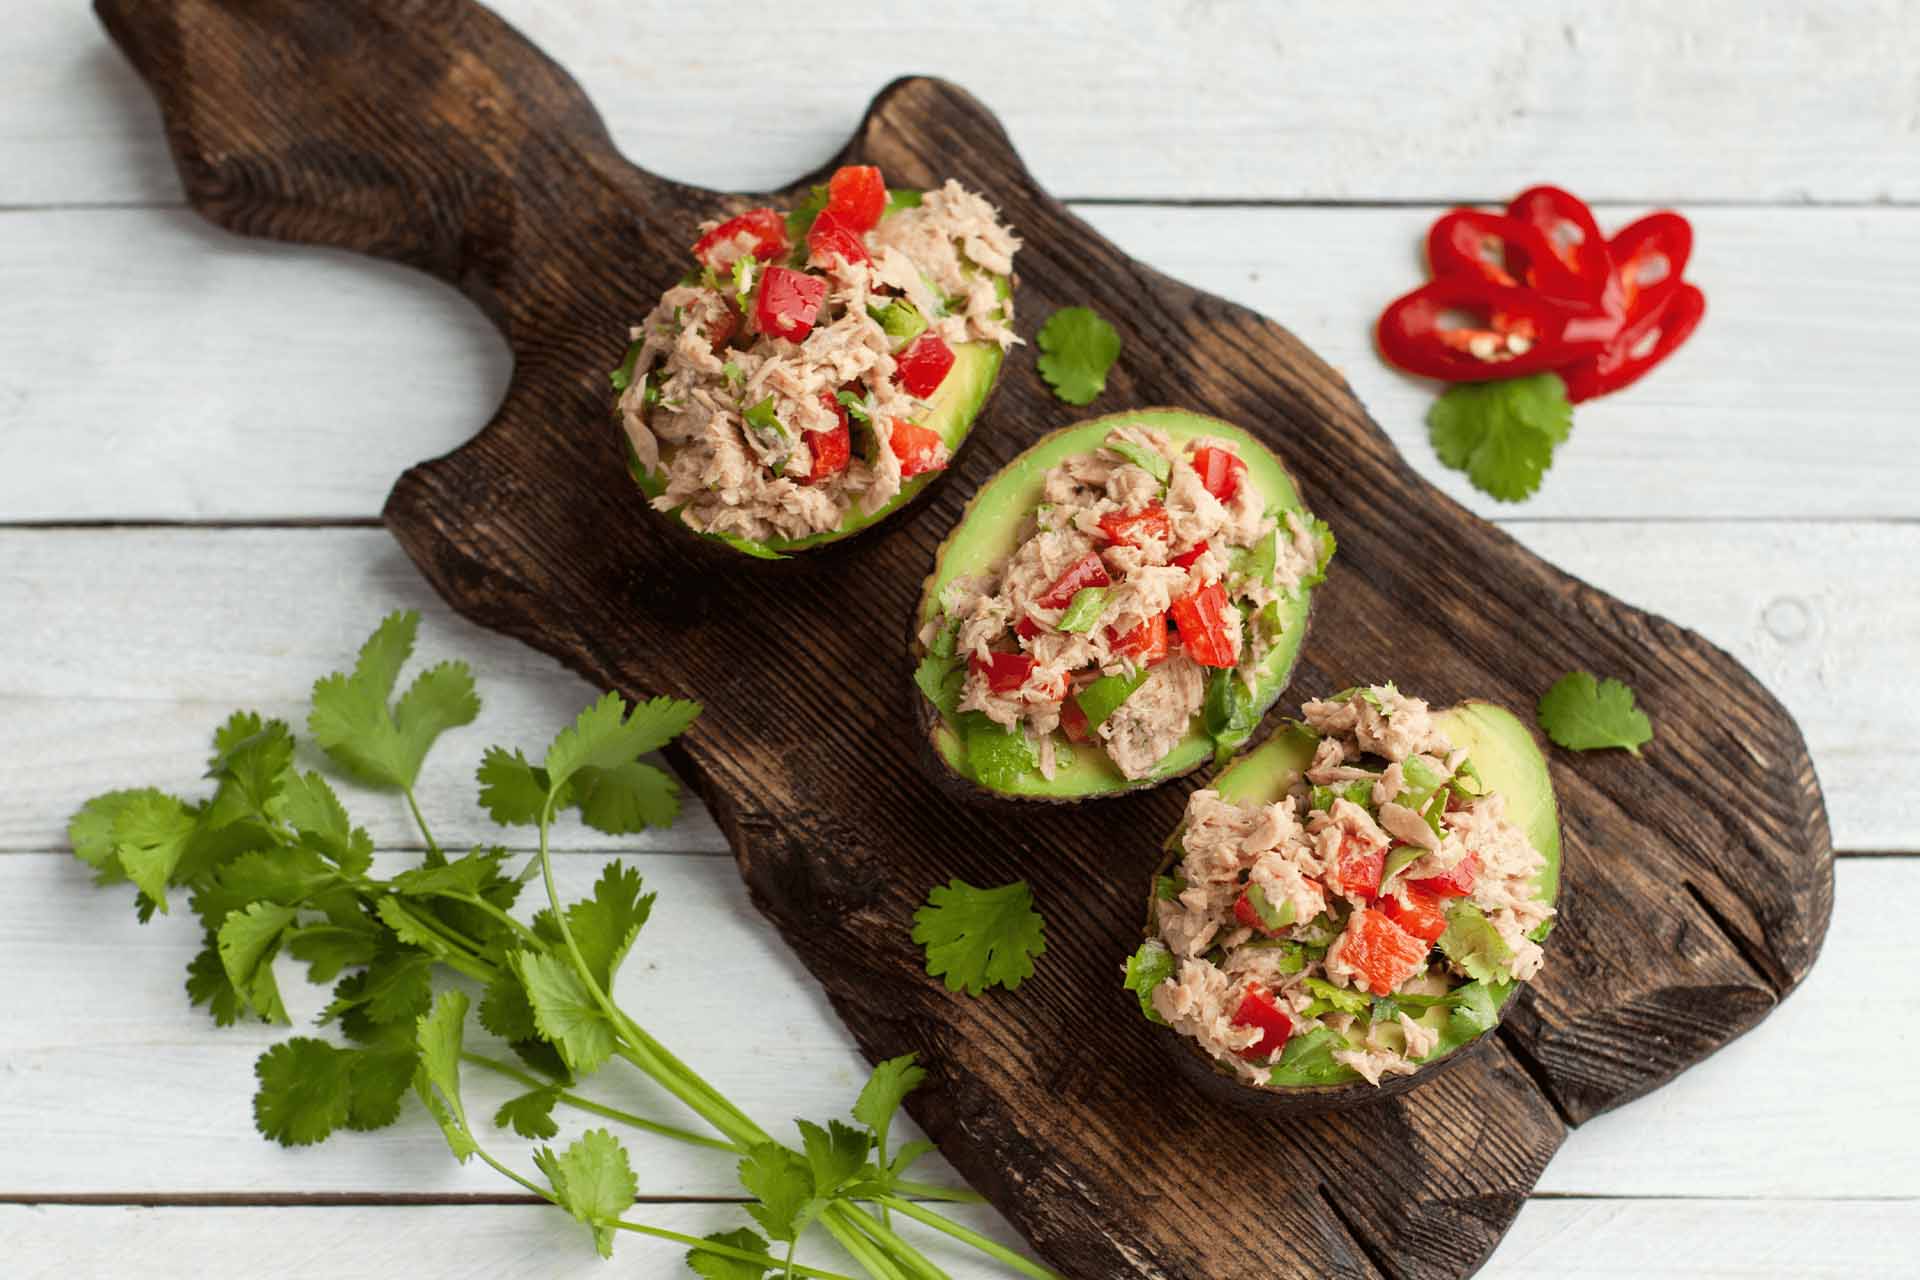 Featured image for “Chicken Salad Stuffed Avocados”